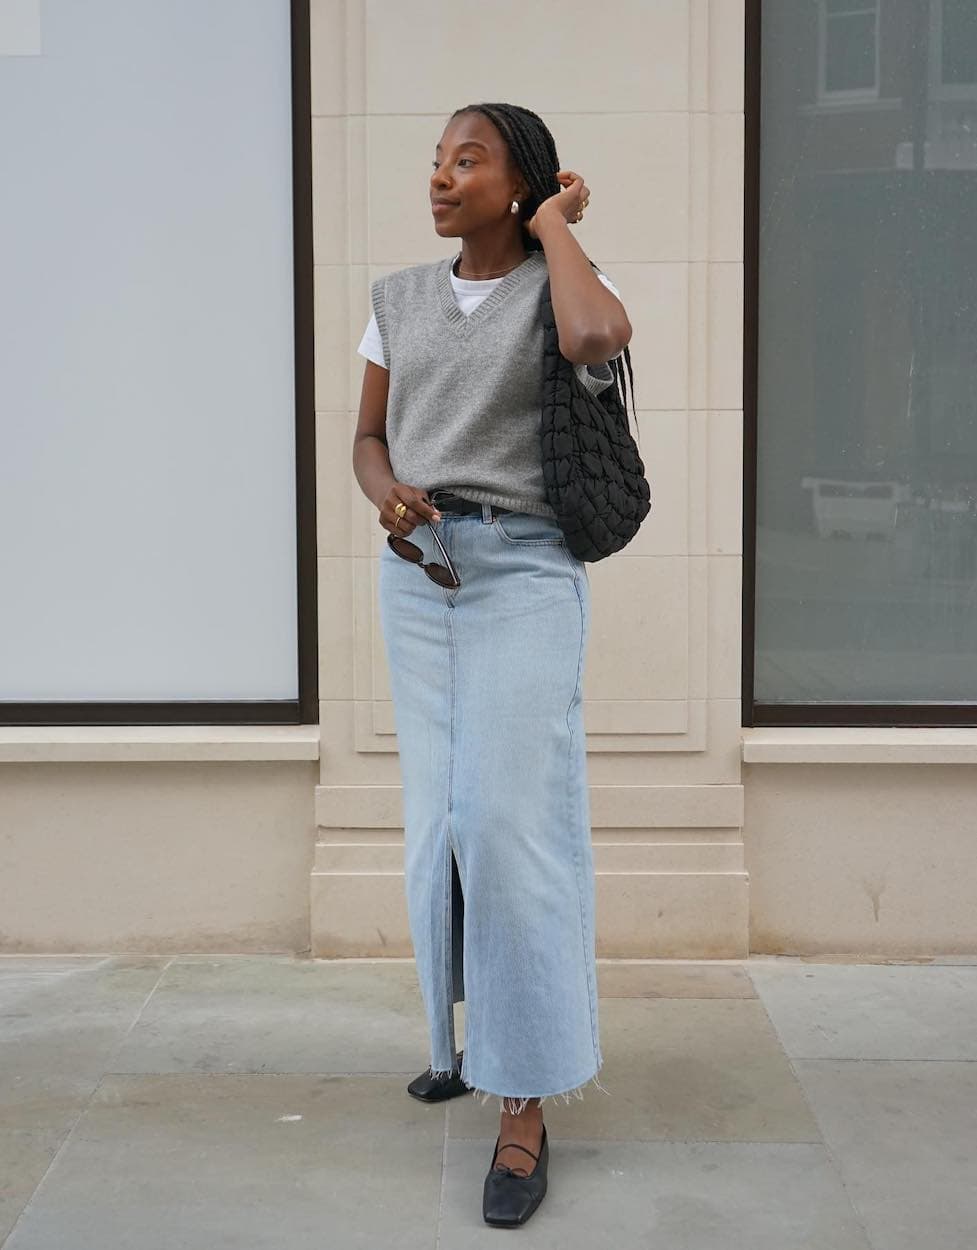 Woman wearing a denim midi skirt with a whit t-shirt, a grey sweater vest and black ballet flats.